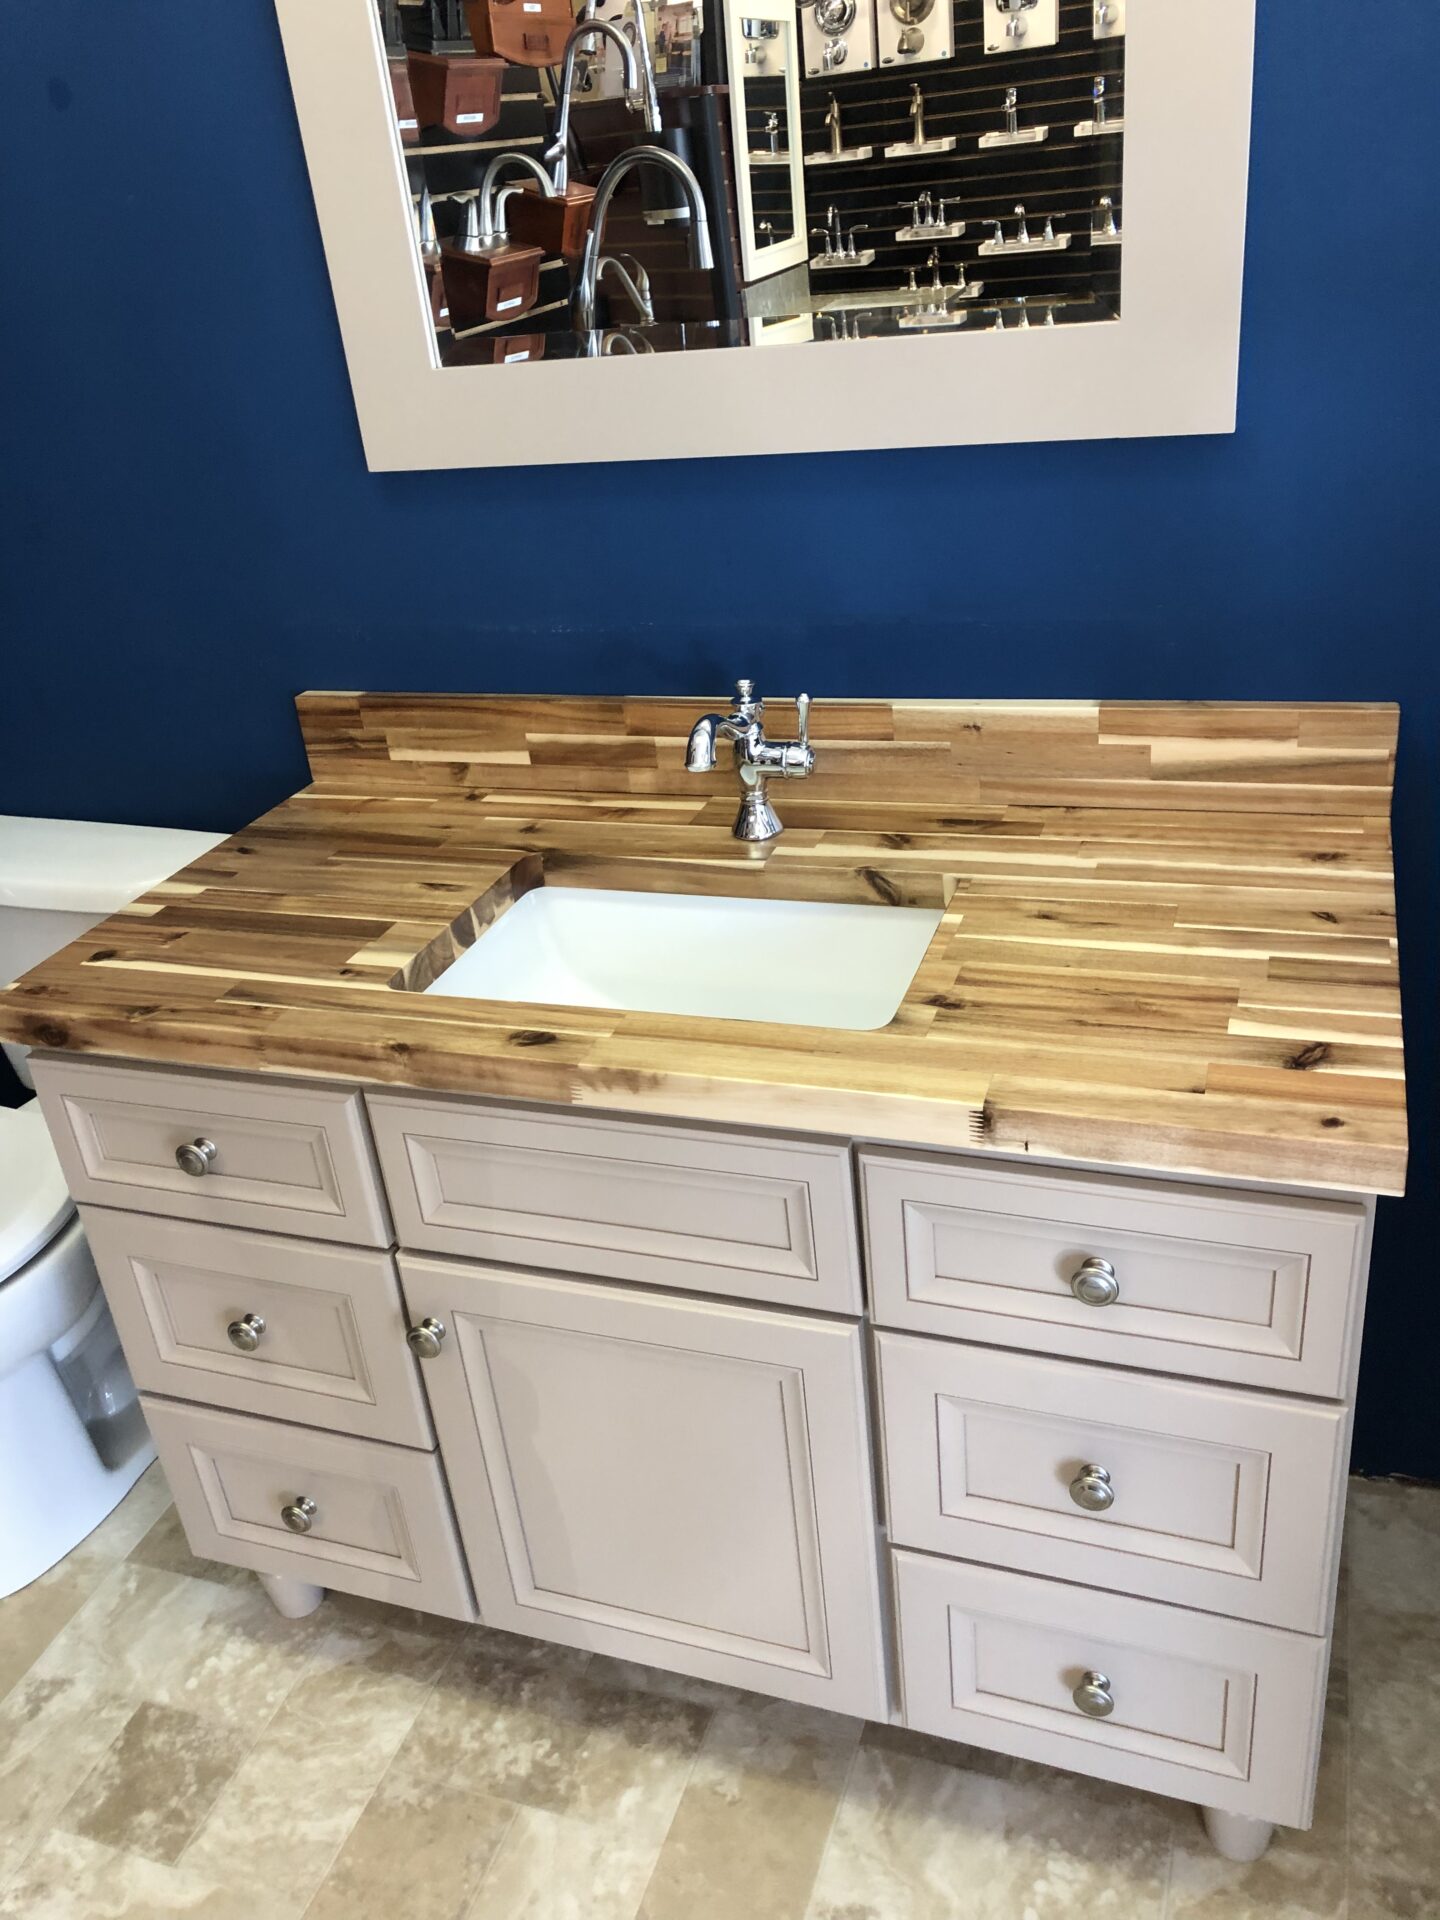 Madera Natural sink with wooden cabinets